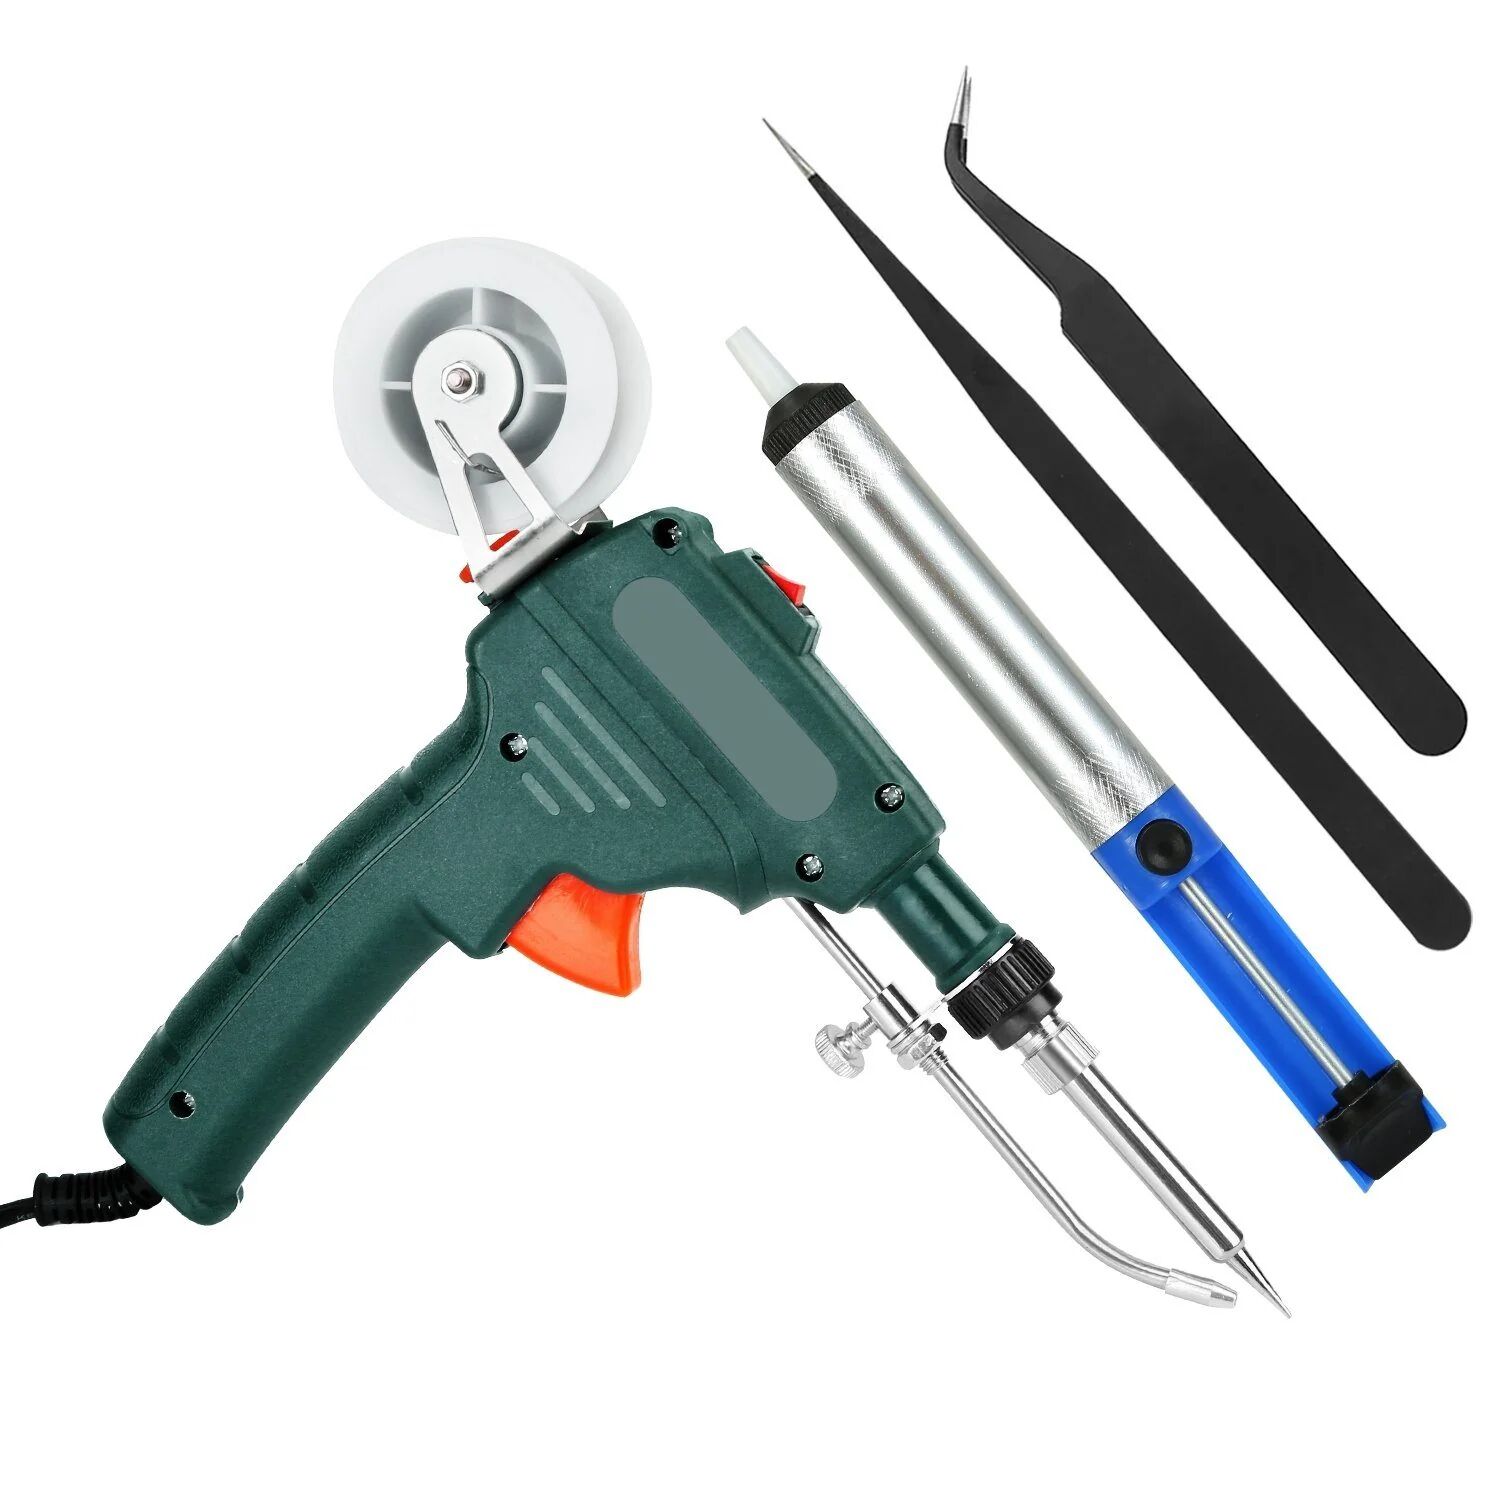 DailySale 5-in-1 Automatic Hand-Held Soldering Iron Gun Kit